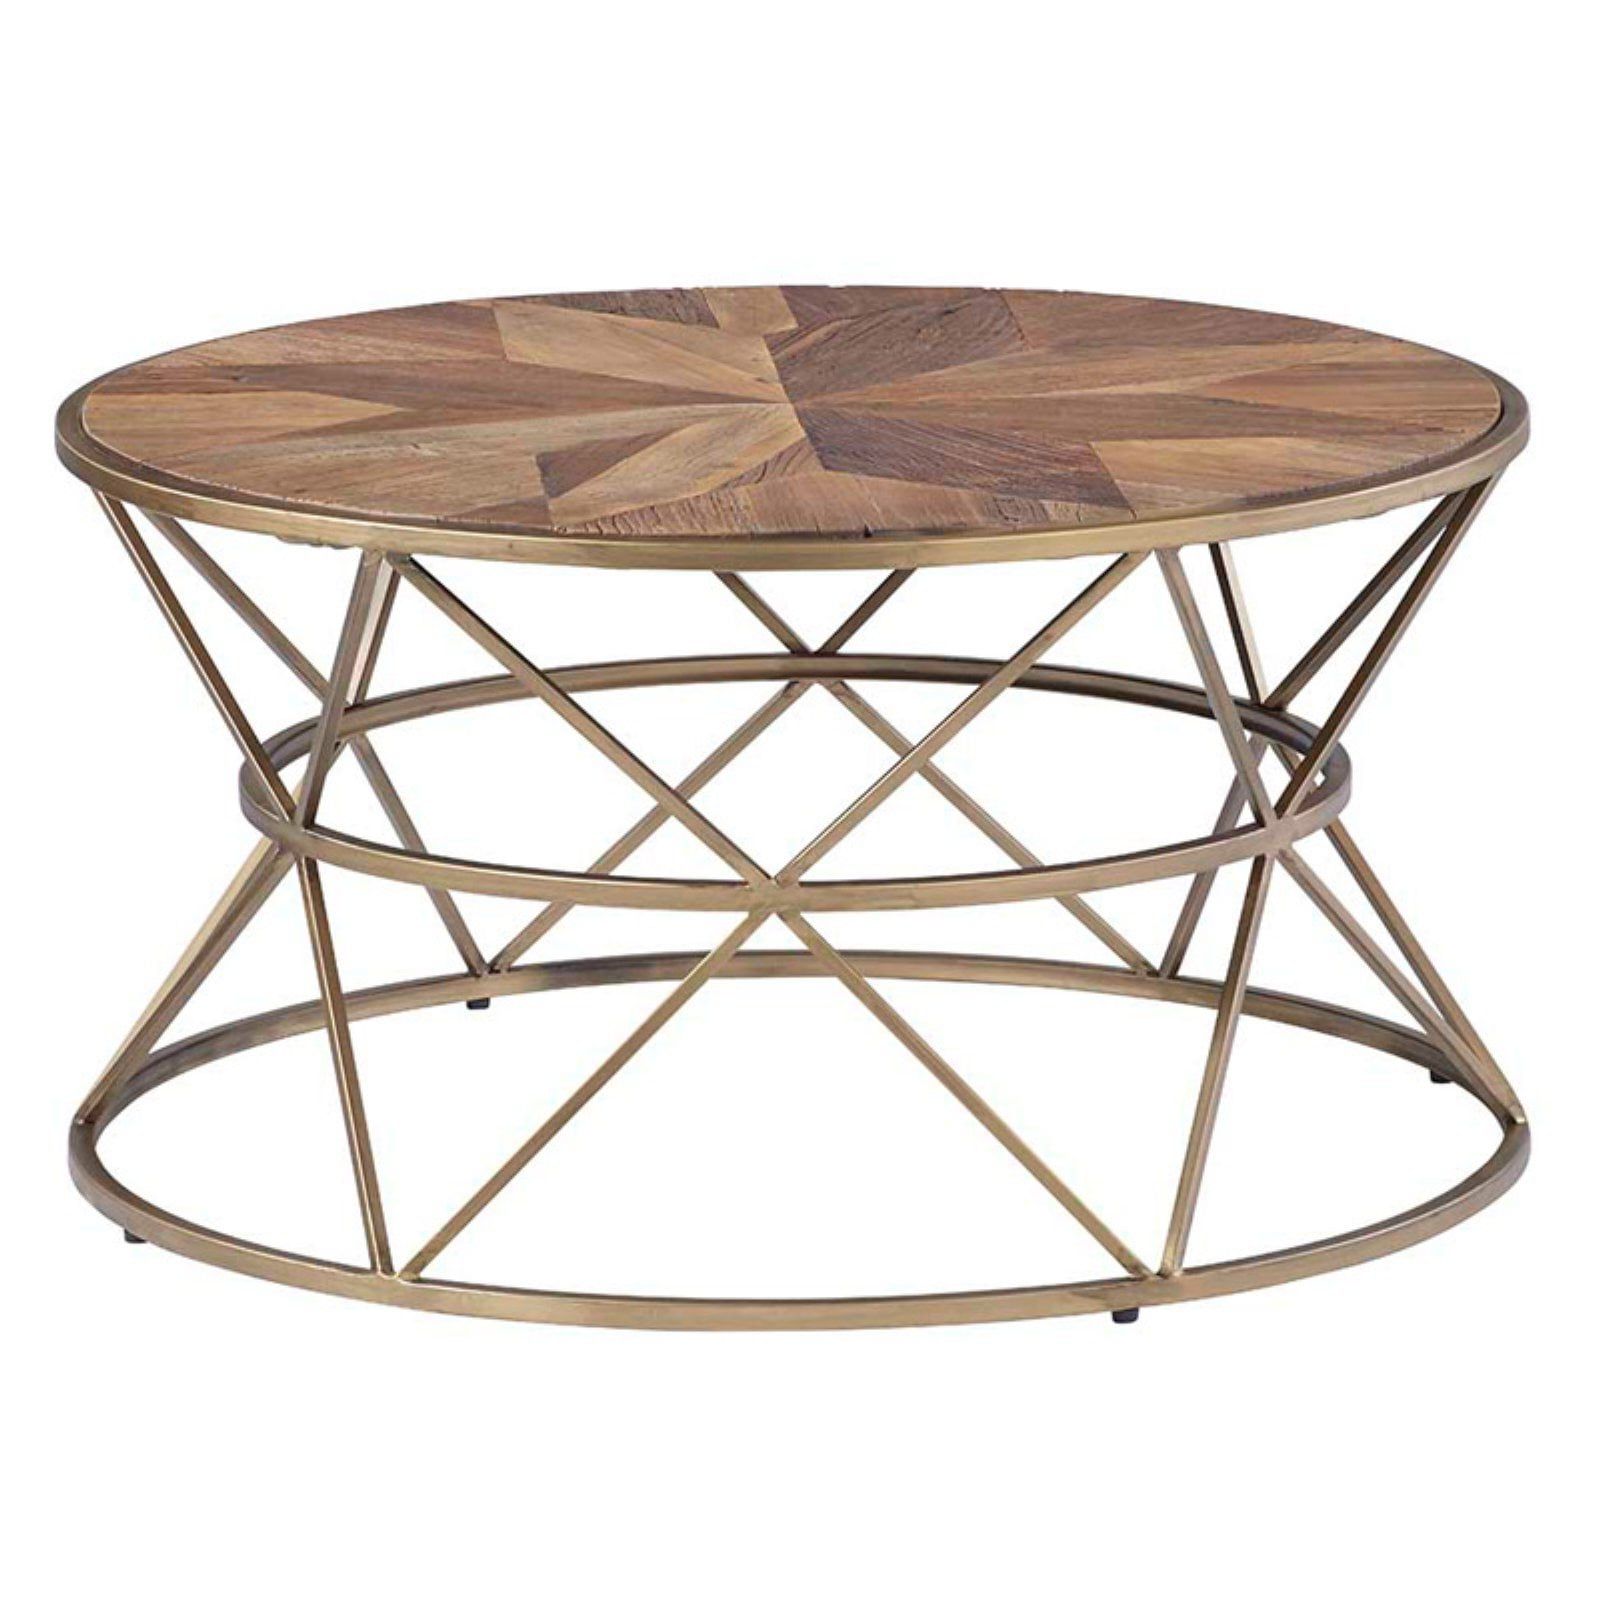 Current Progressive Furniture Cocktail Tables Pertaining To Progressive Furniture Soho Round Cocktail/coffee Table – Walmart (View 15 of 15)